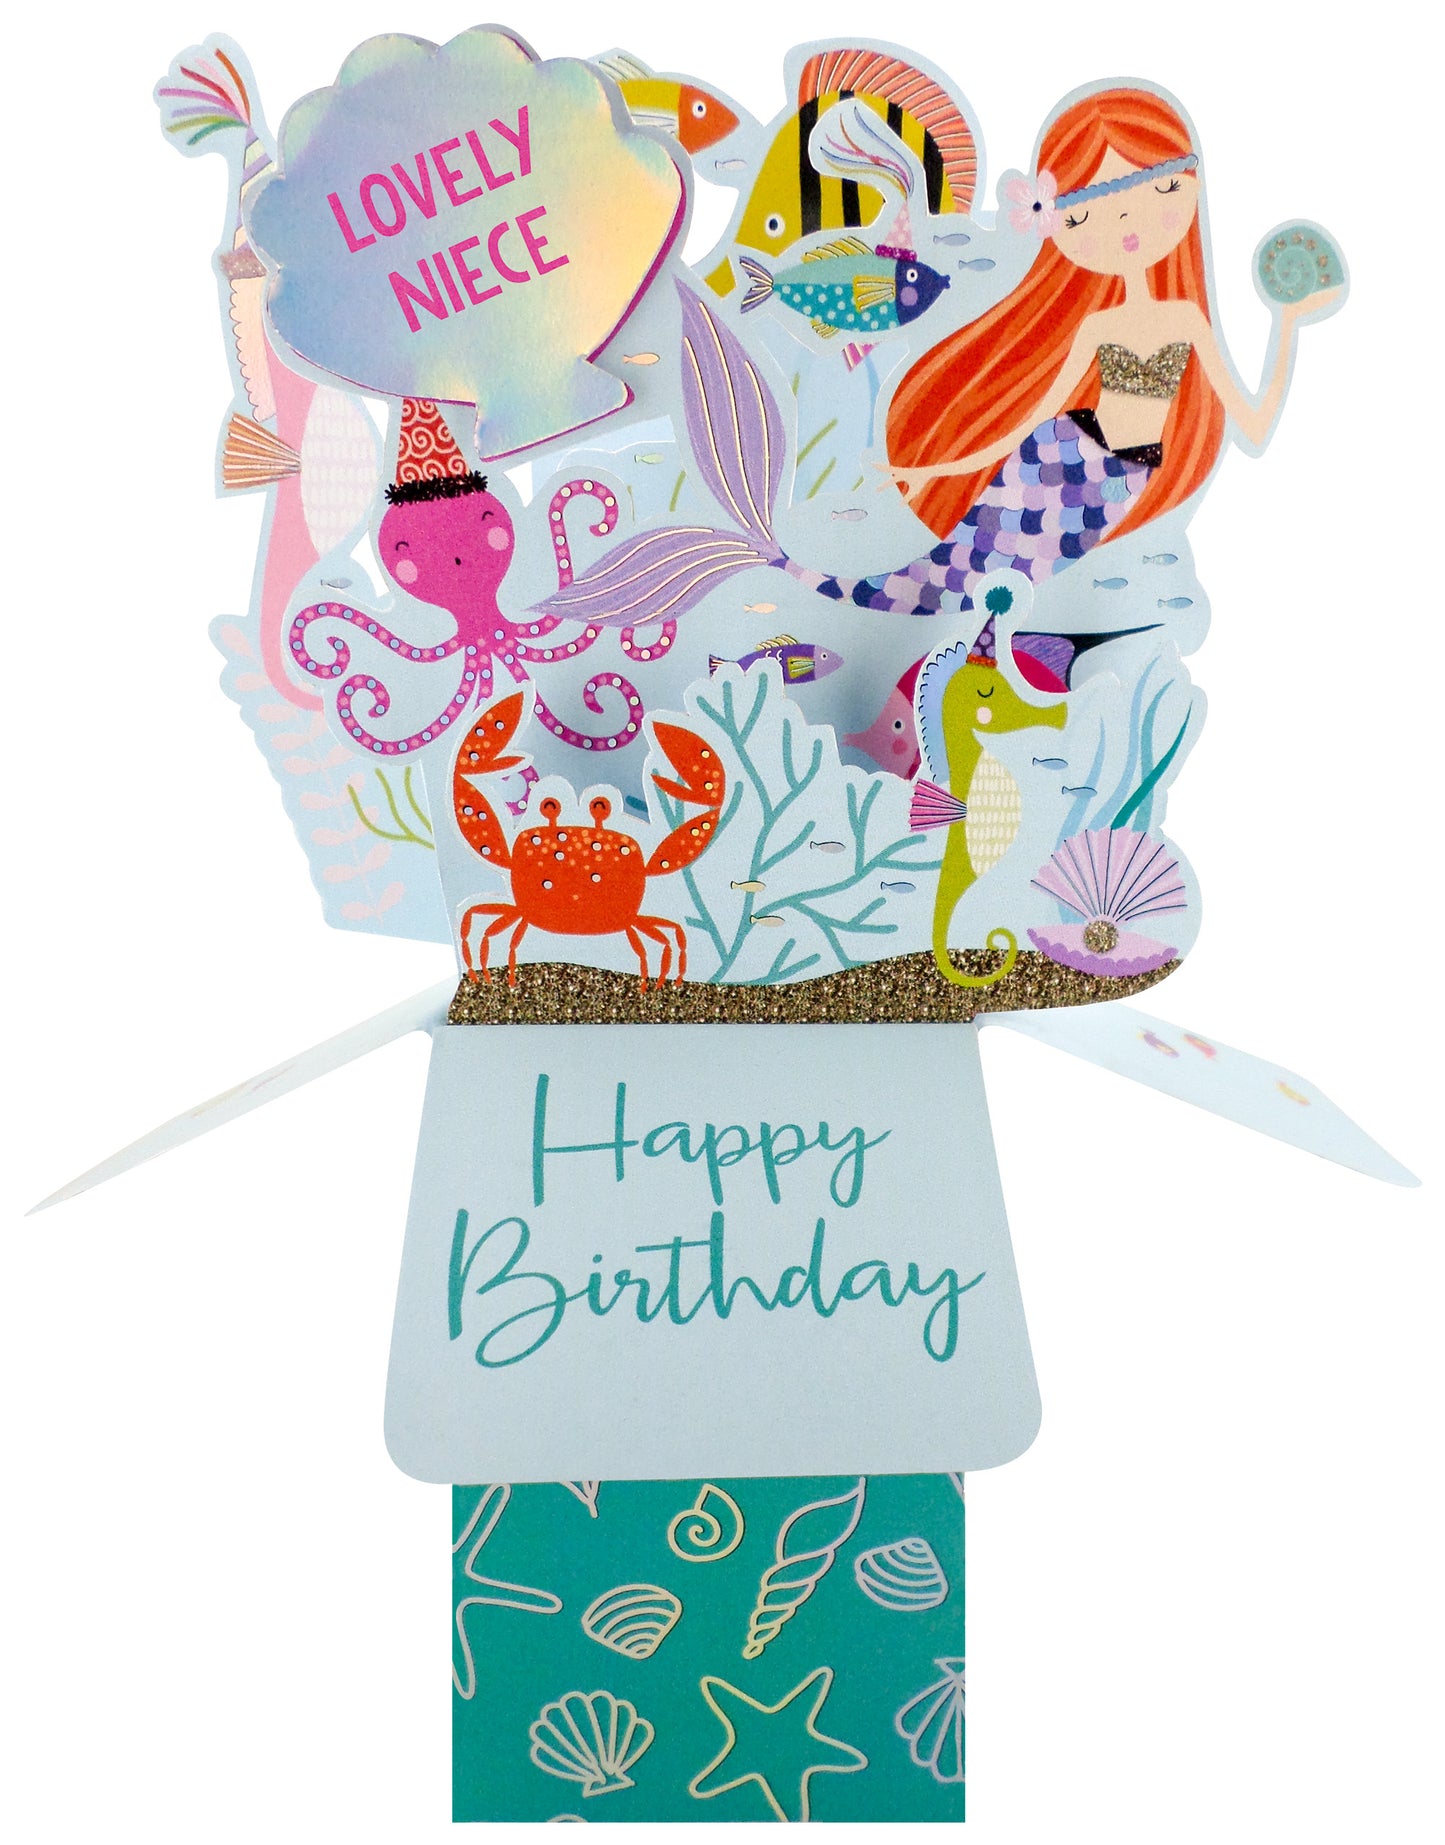 Clever Cube Lovely Niece Undersea Birthday Bash! Birthday Pop Up Greeting Card